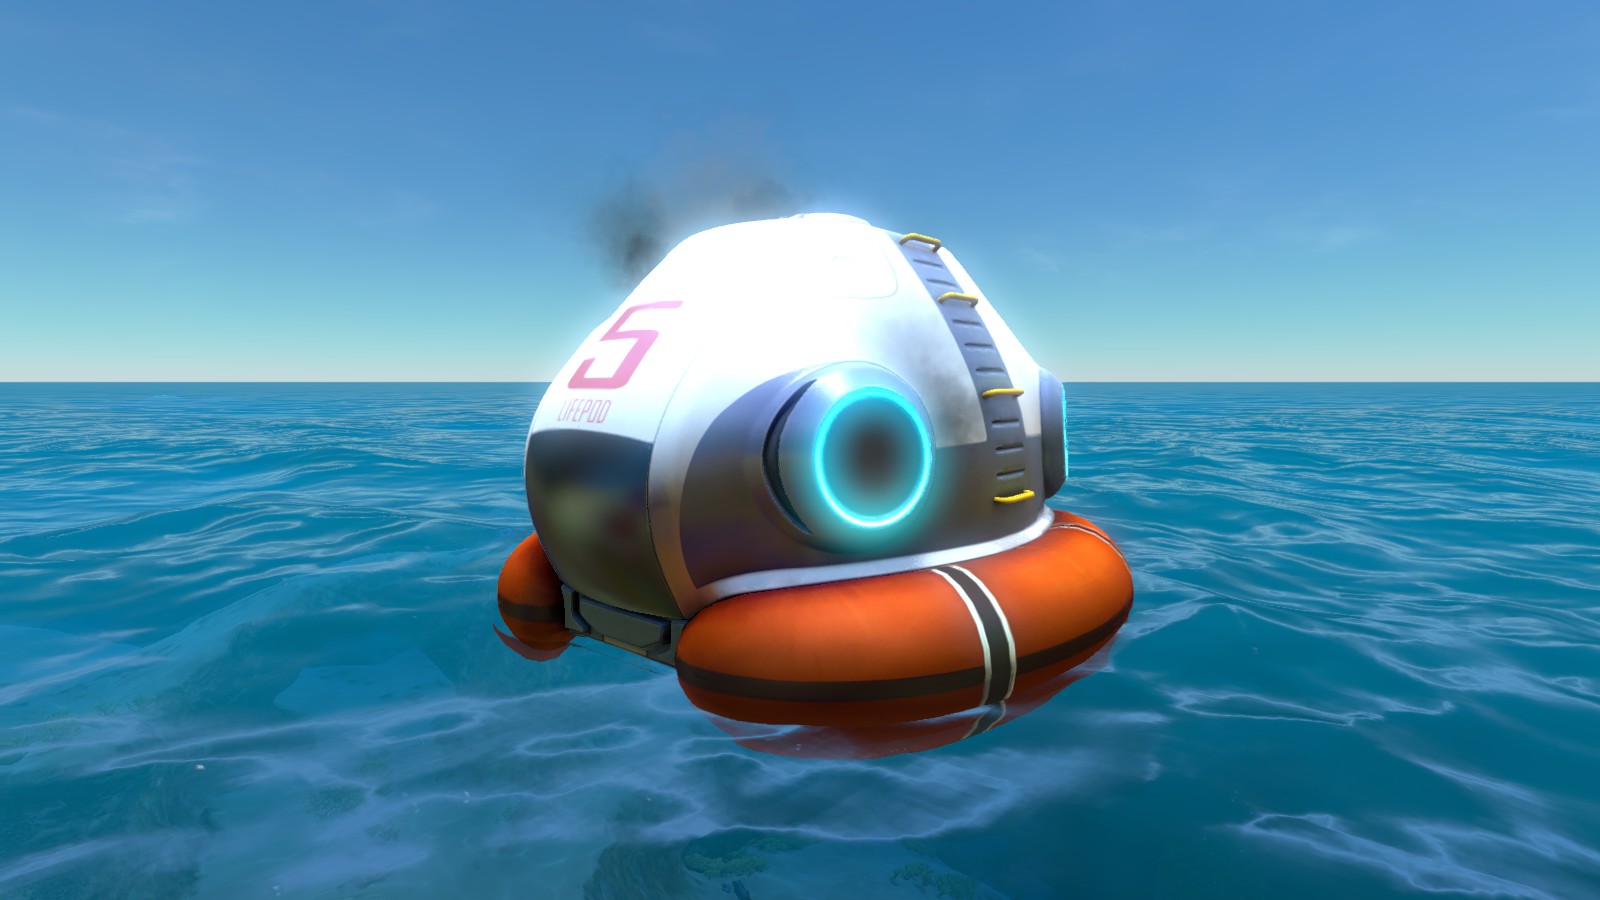 Gallery of Subnautica Lifepod 2 Map.